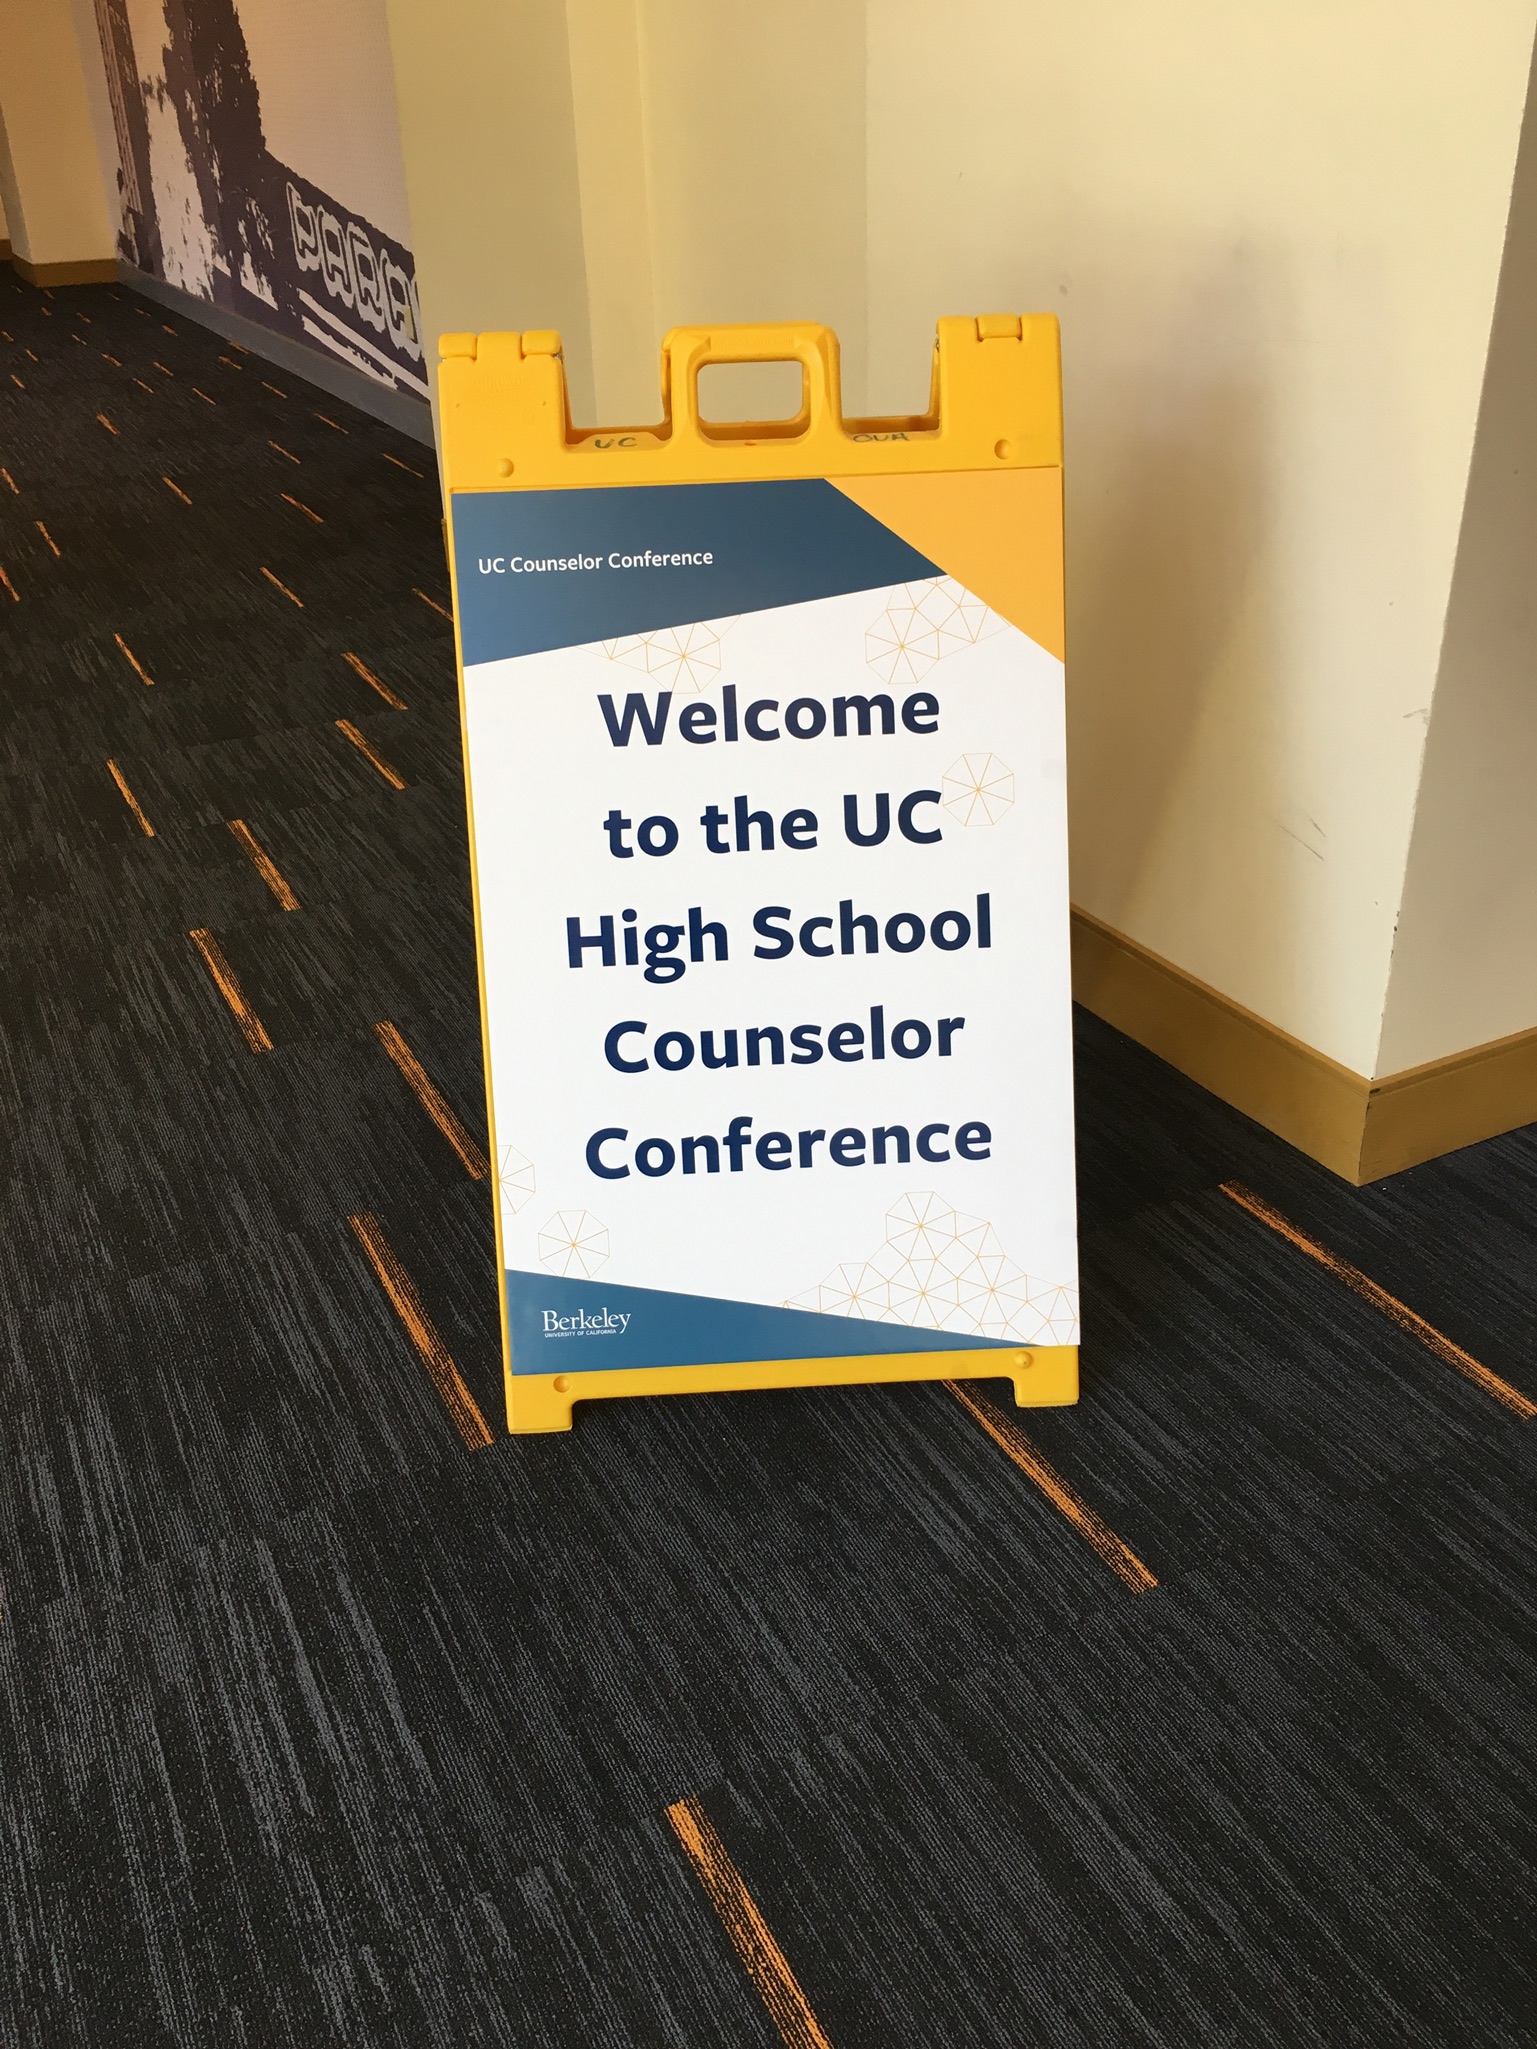 Advising 101 Tips from the UC Counselor Conference Green Ivy